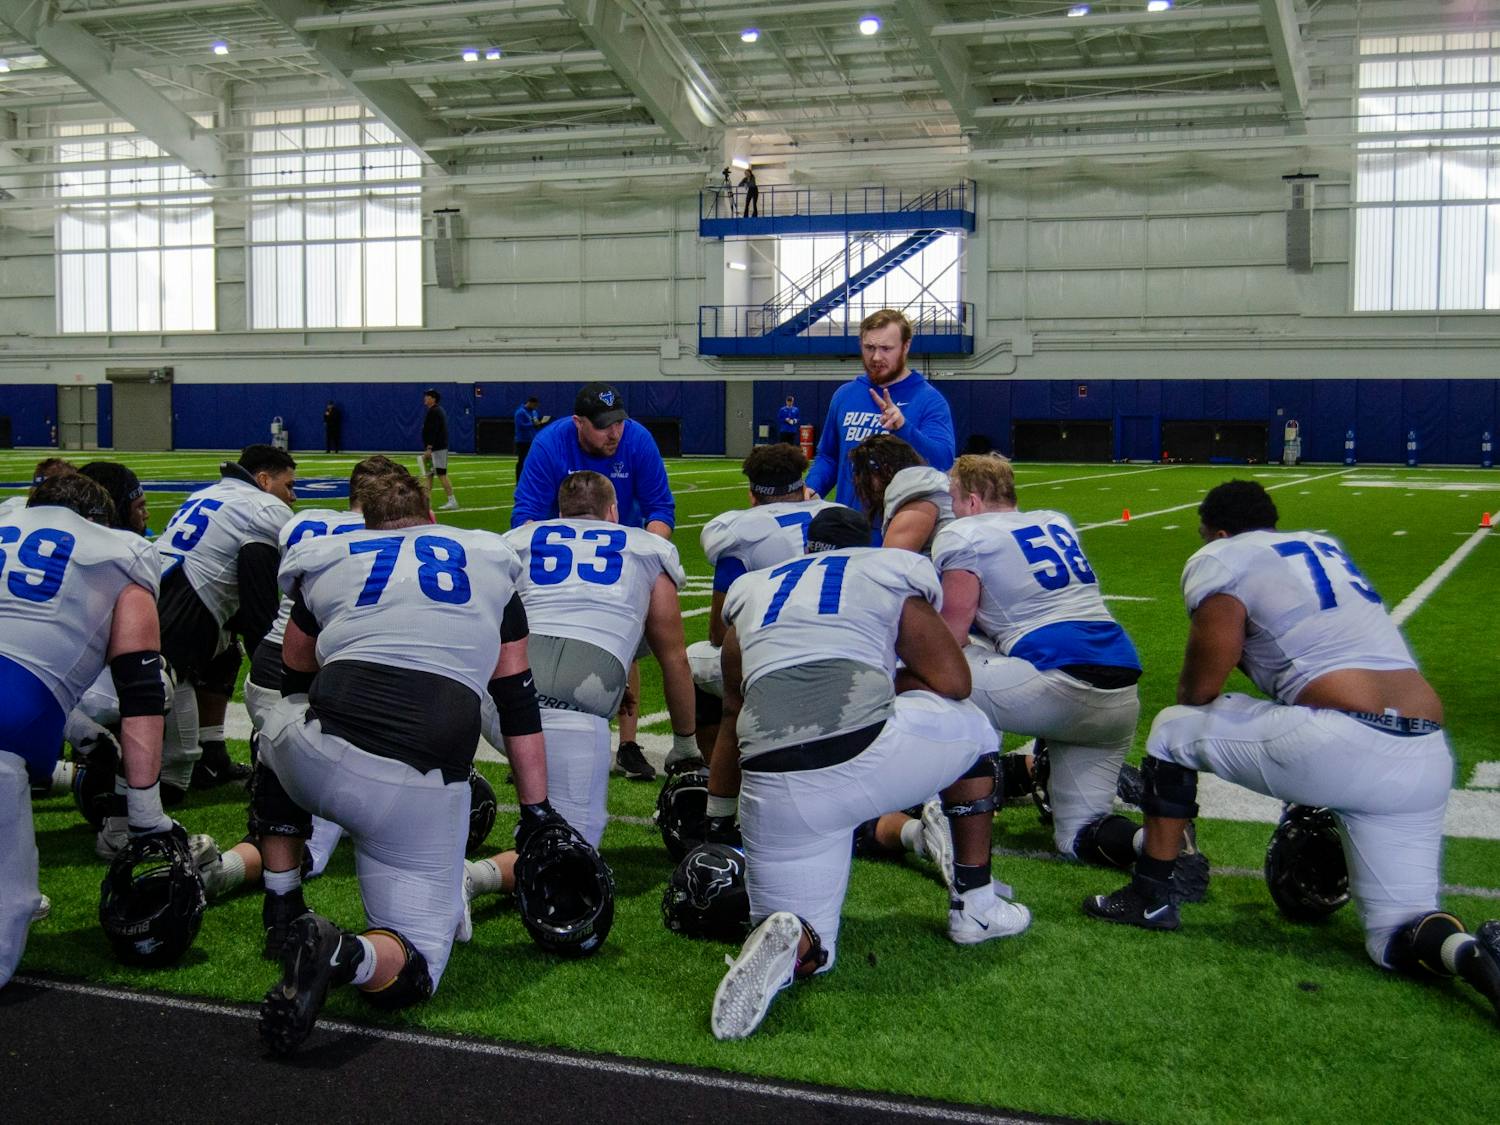 Members of the offensive line crowd receive instruction from their coaches on a recent day of spring practice.